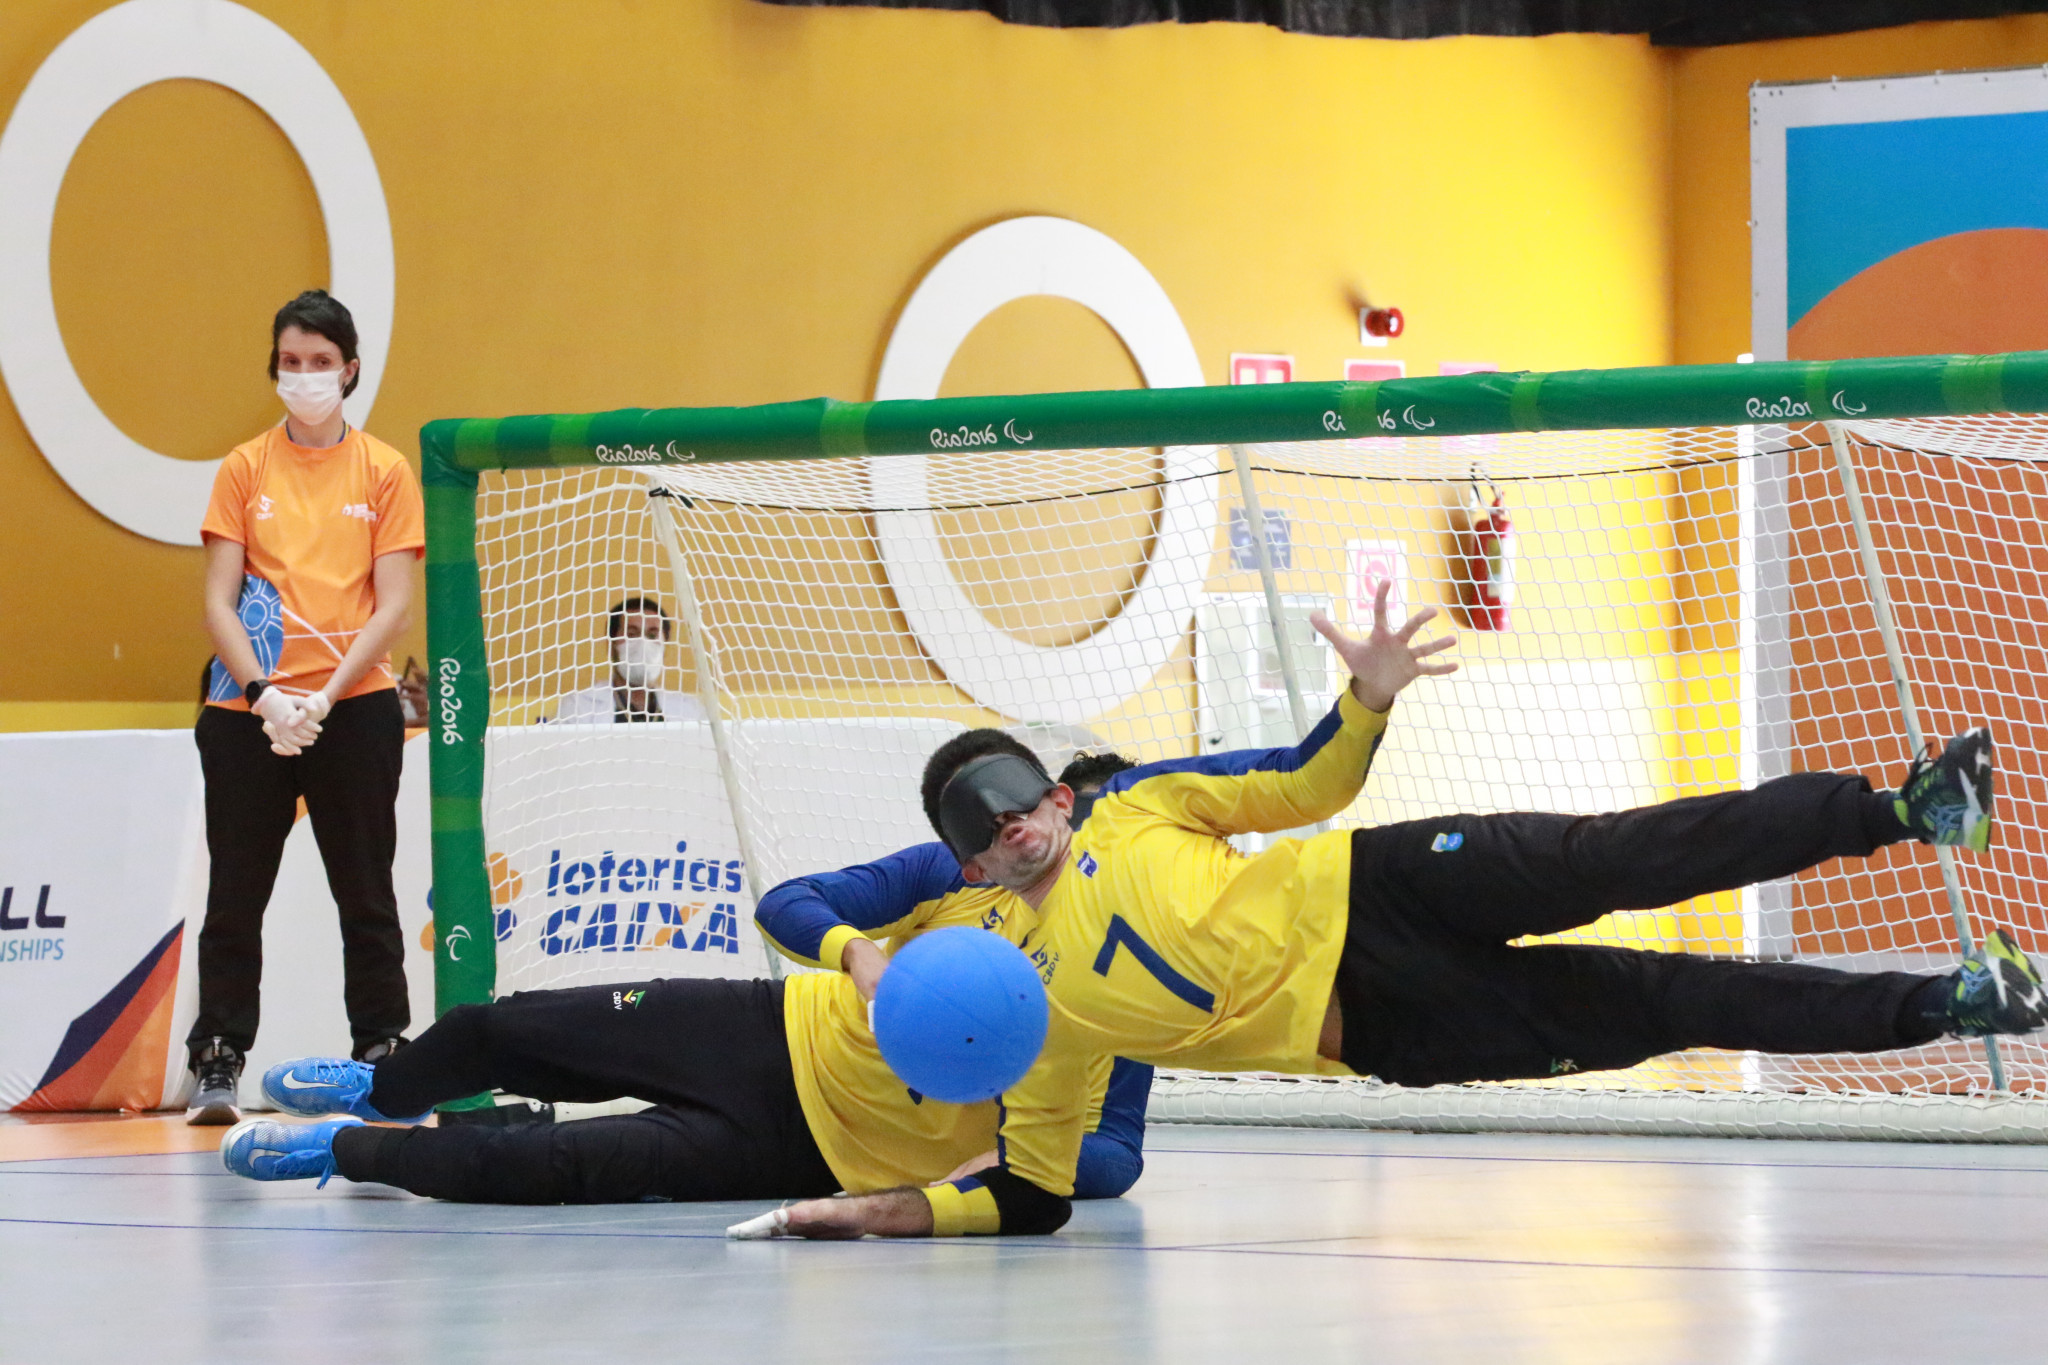 Brazil triumphed in the men's and women's event at the IBSA Goalball Americas Championships ©Renan Cacioli/CBDV